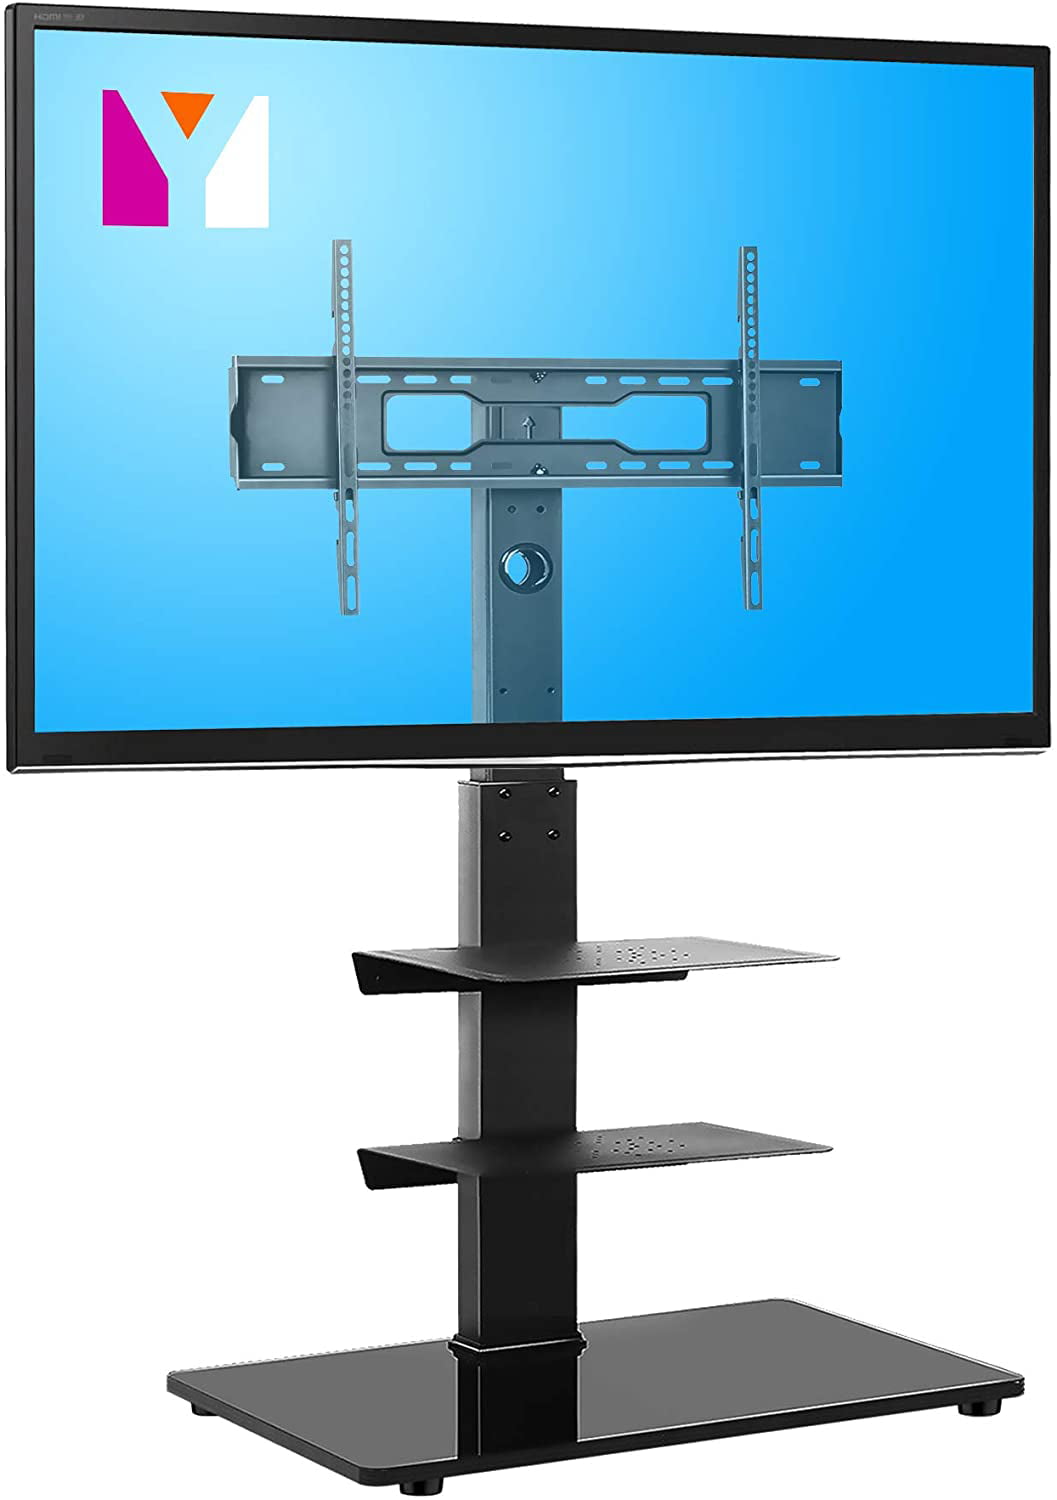 Floor TV Stand with Swivel Mount for 32 37 40 43 47 50 55 60 65 inch TVs 